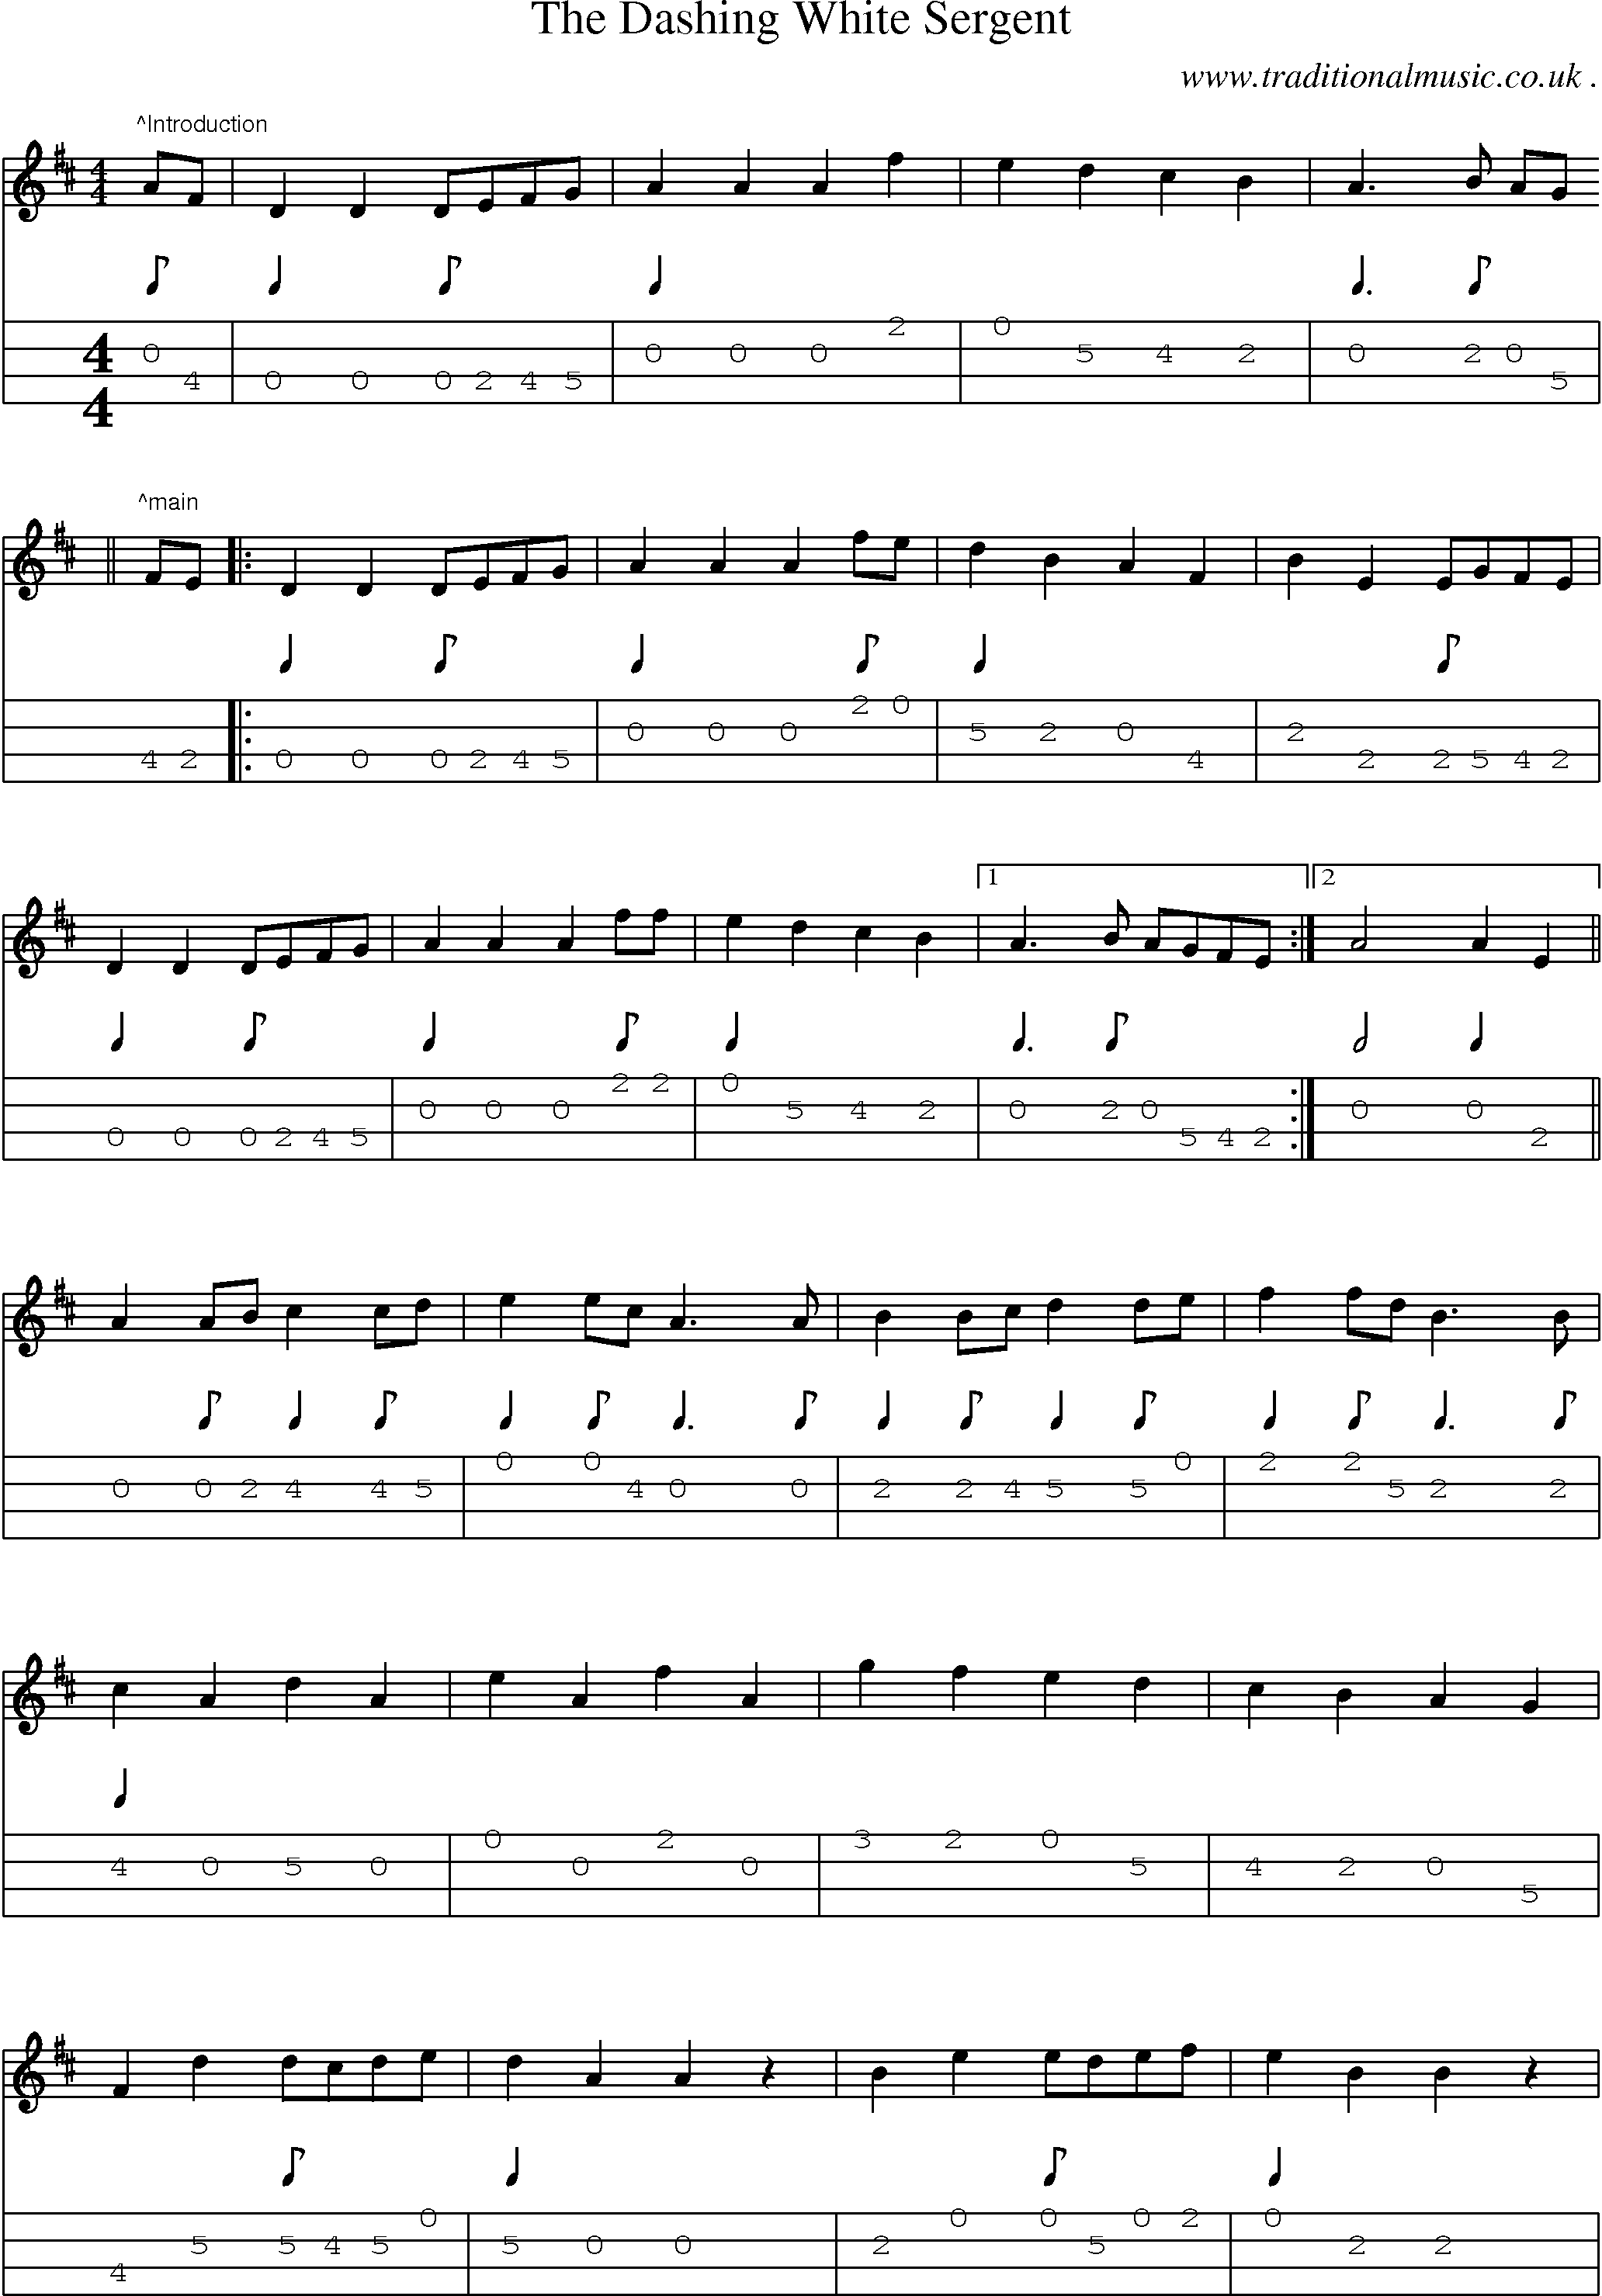 Sheet-Music and Mandolin Tabs for The Dashing White Sergent